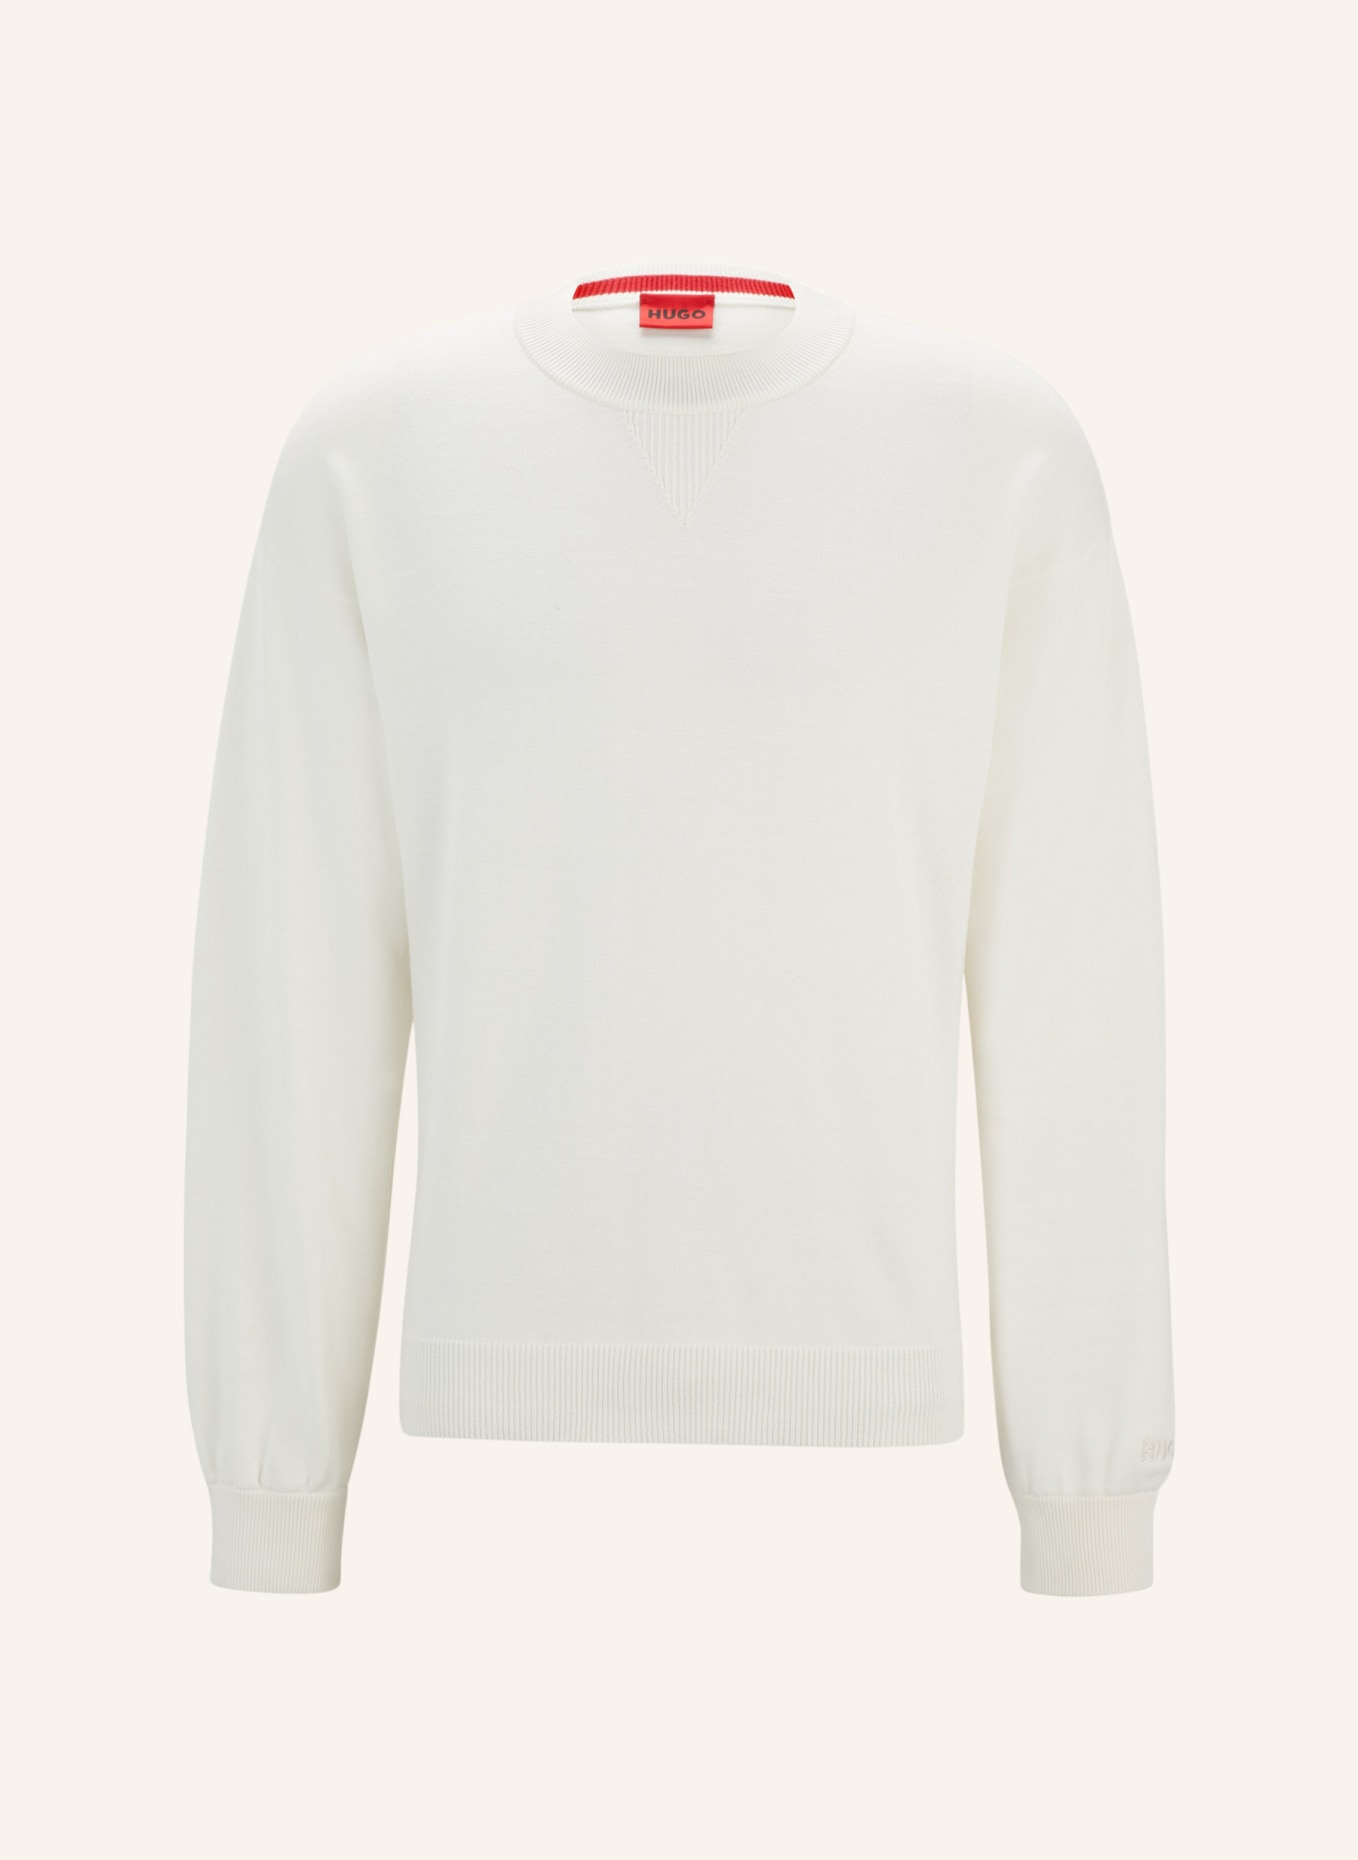 HUGO Pullover SWART Relaxed Fit, Farbe: WEISS (Bild 1)